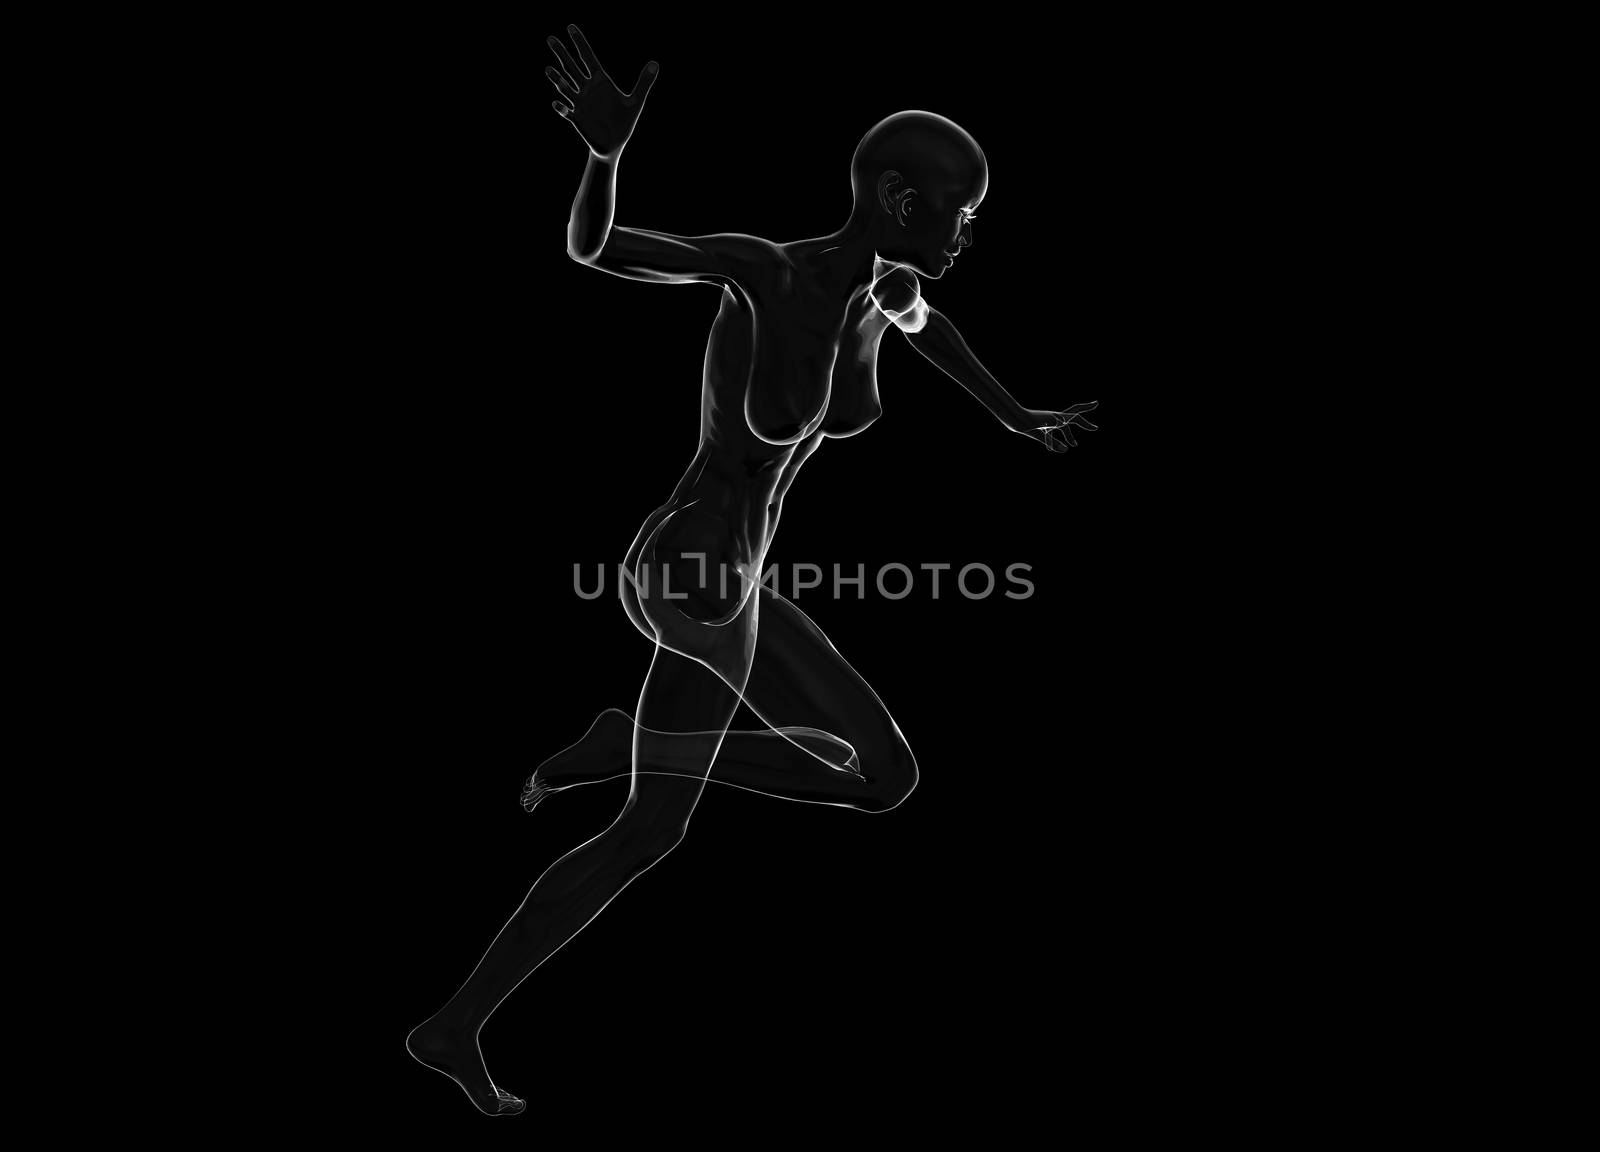 Slim attractive sportswoman made of glass or soap bubble running against a black background. 3d illustration.